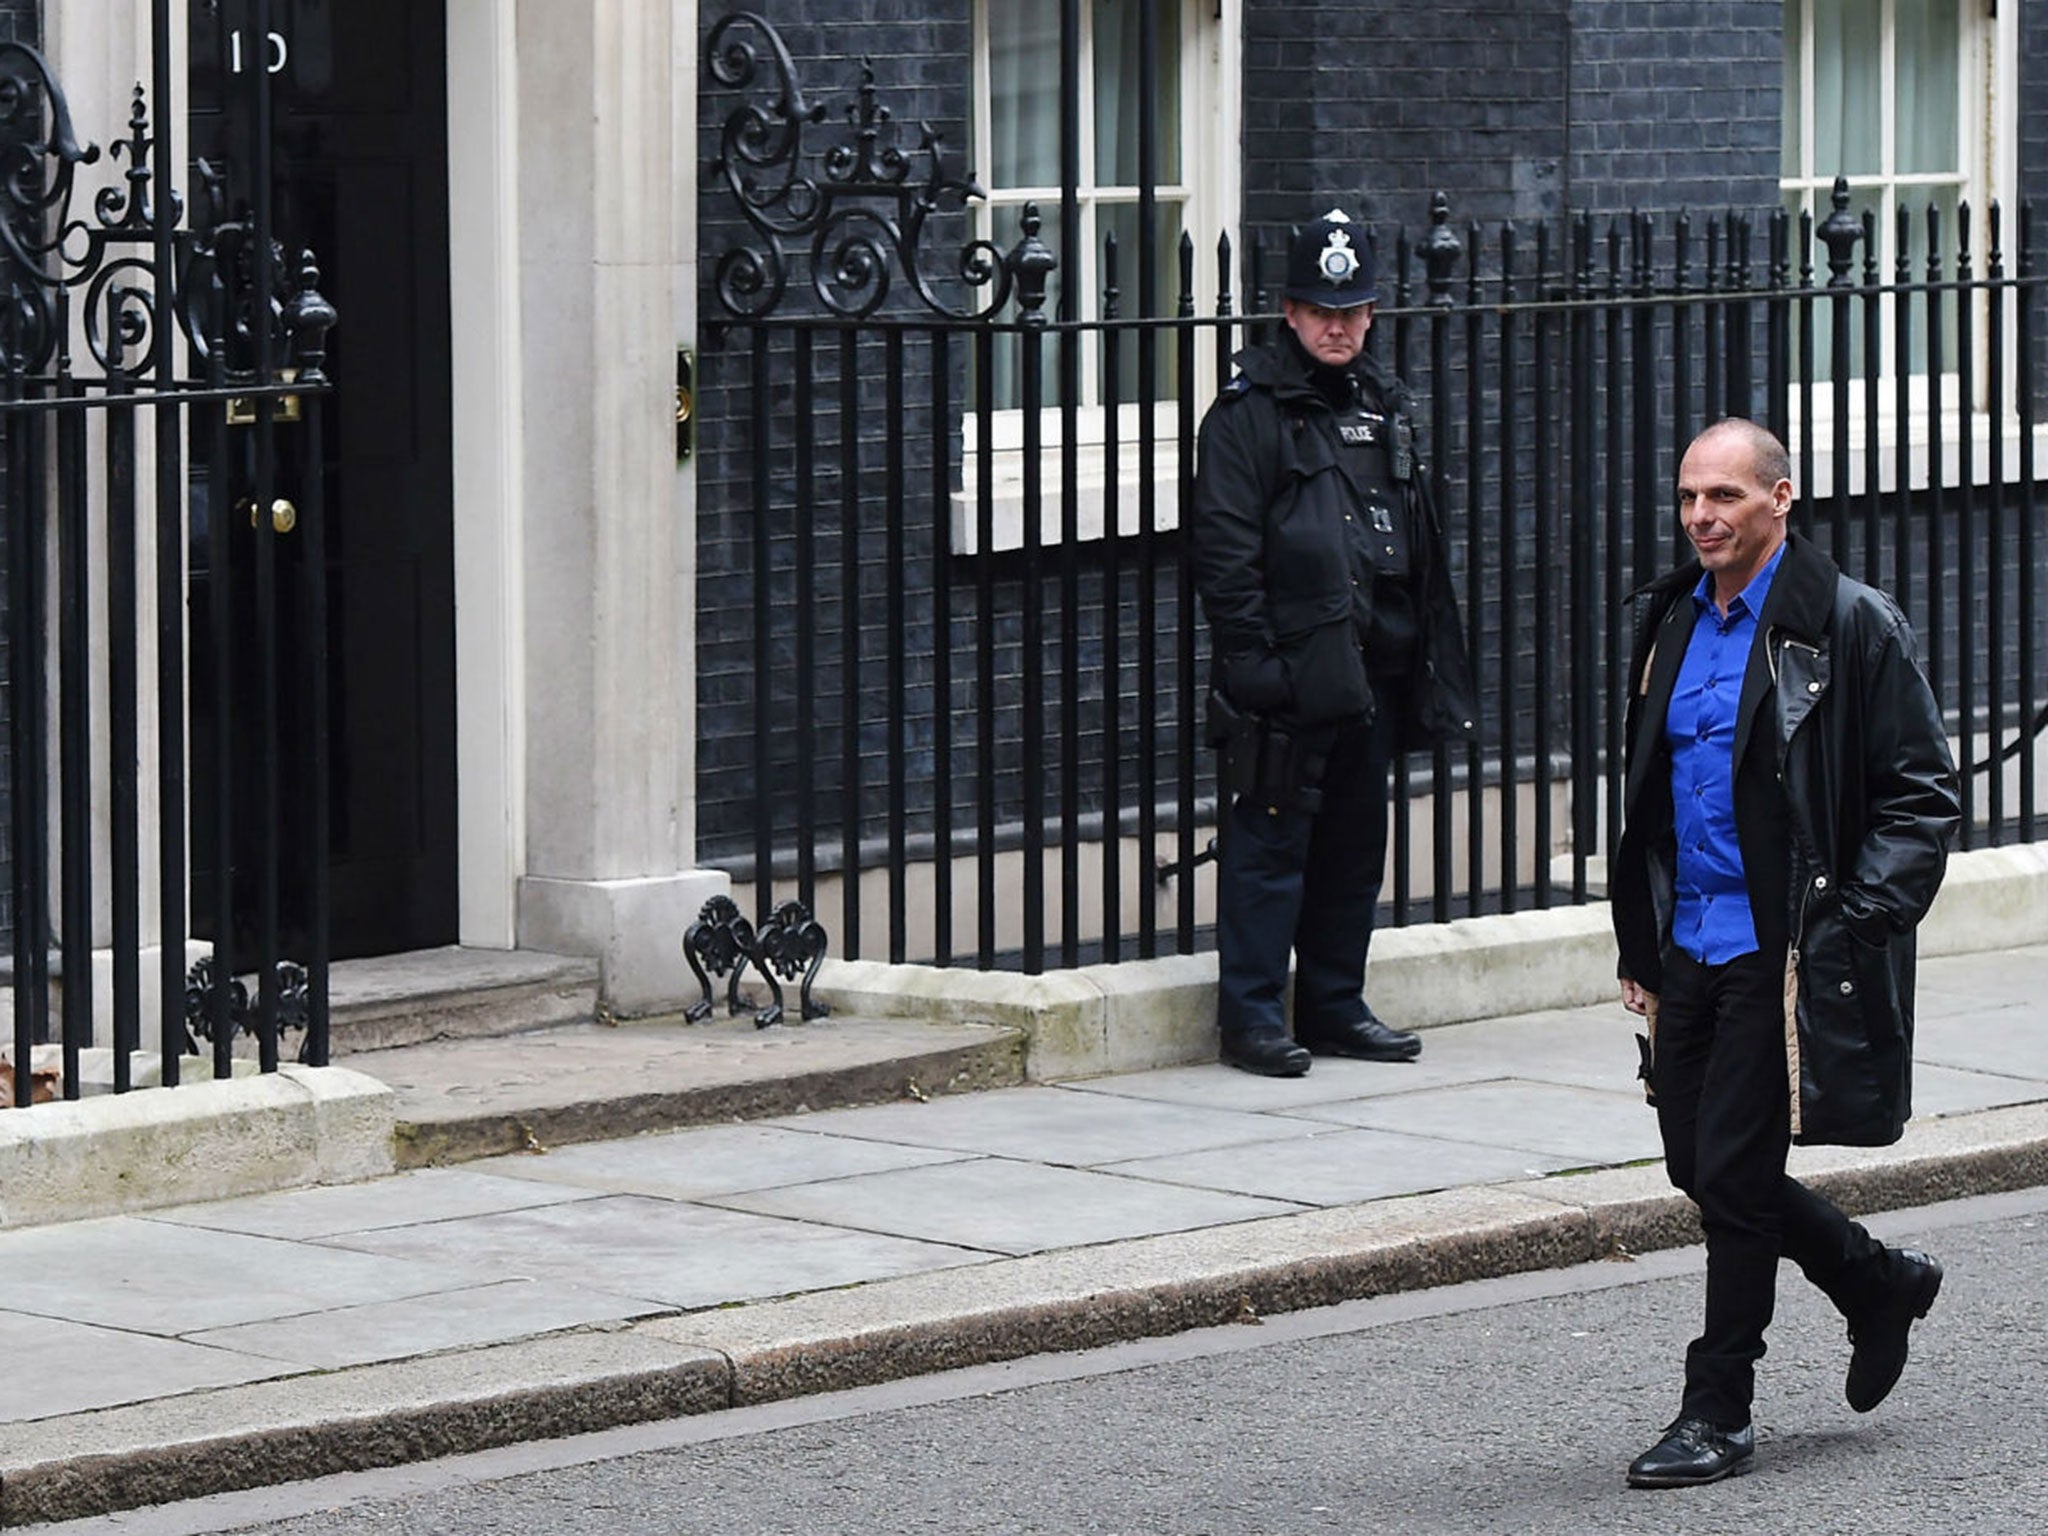 Even the Greek crisis doesn't seem to matter - and leftist Finance Minister Yanis Varoufakis, pictured at 11 Downing Street, has become a rock star